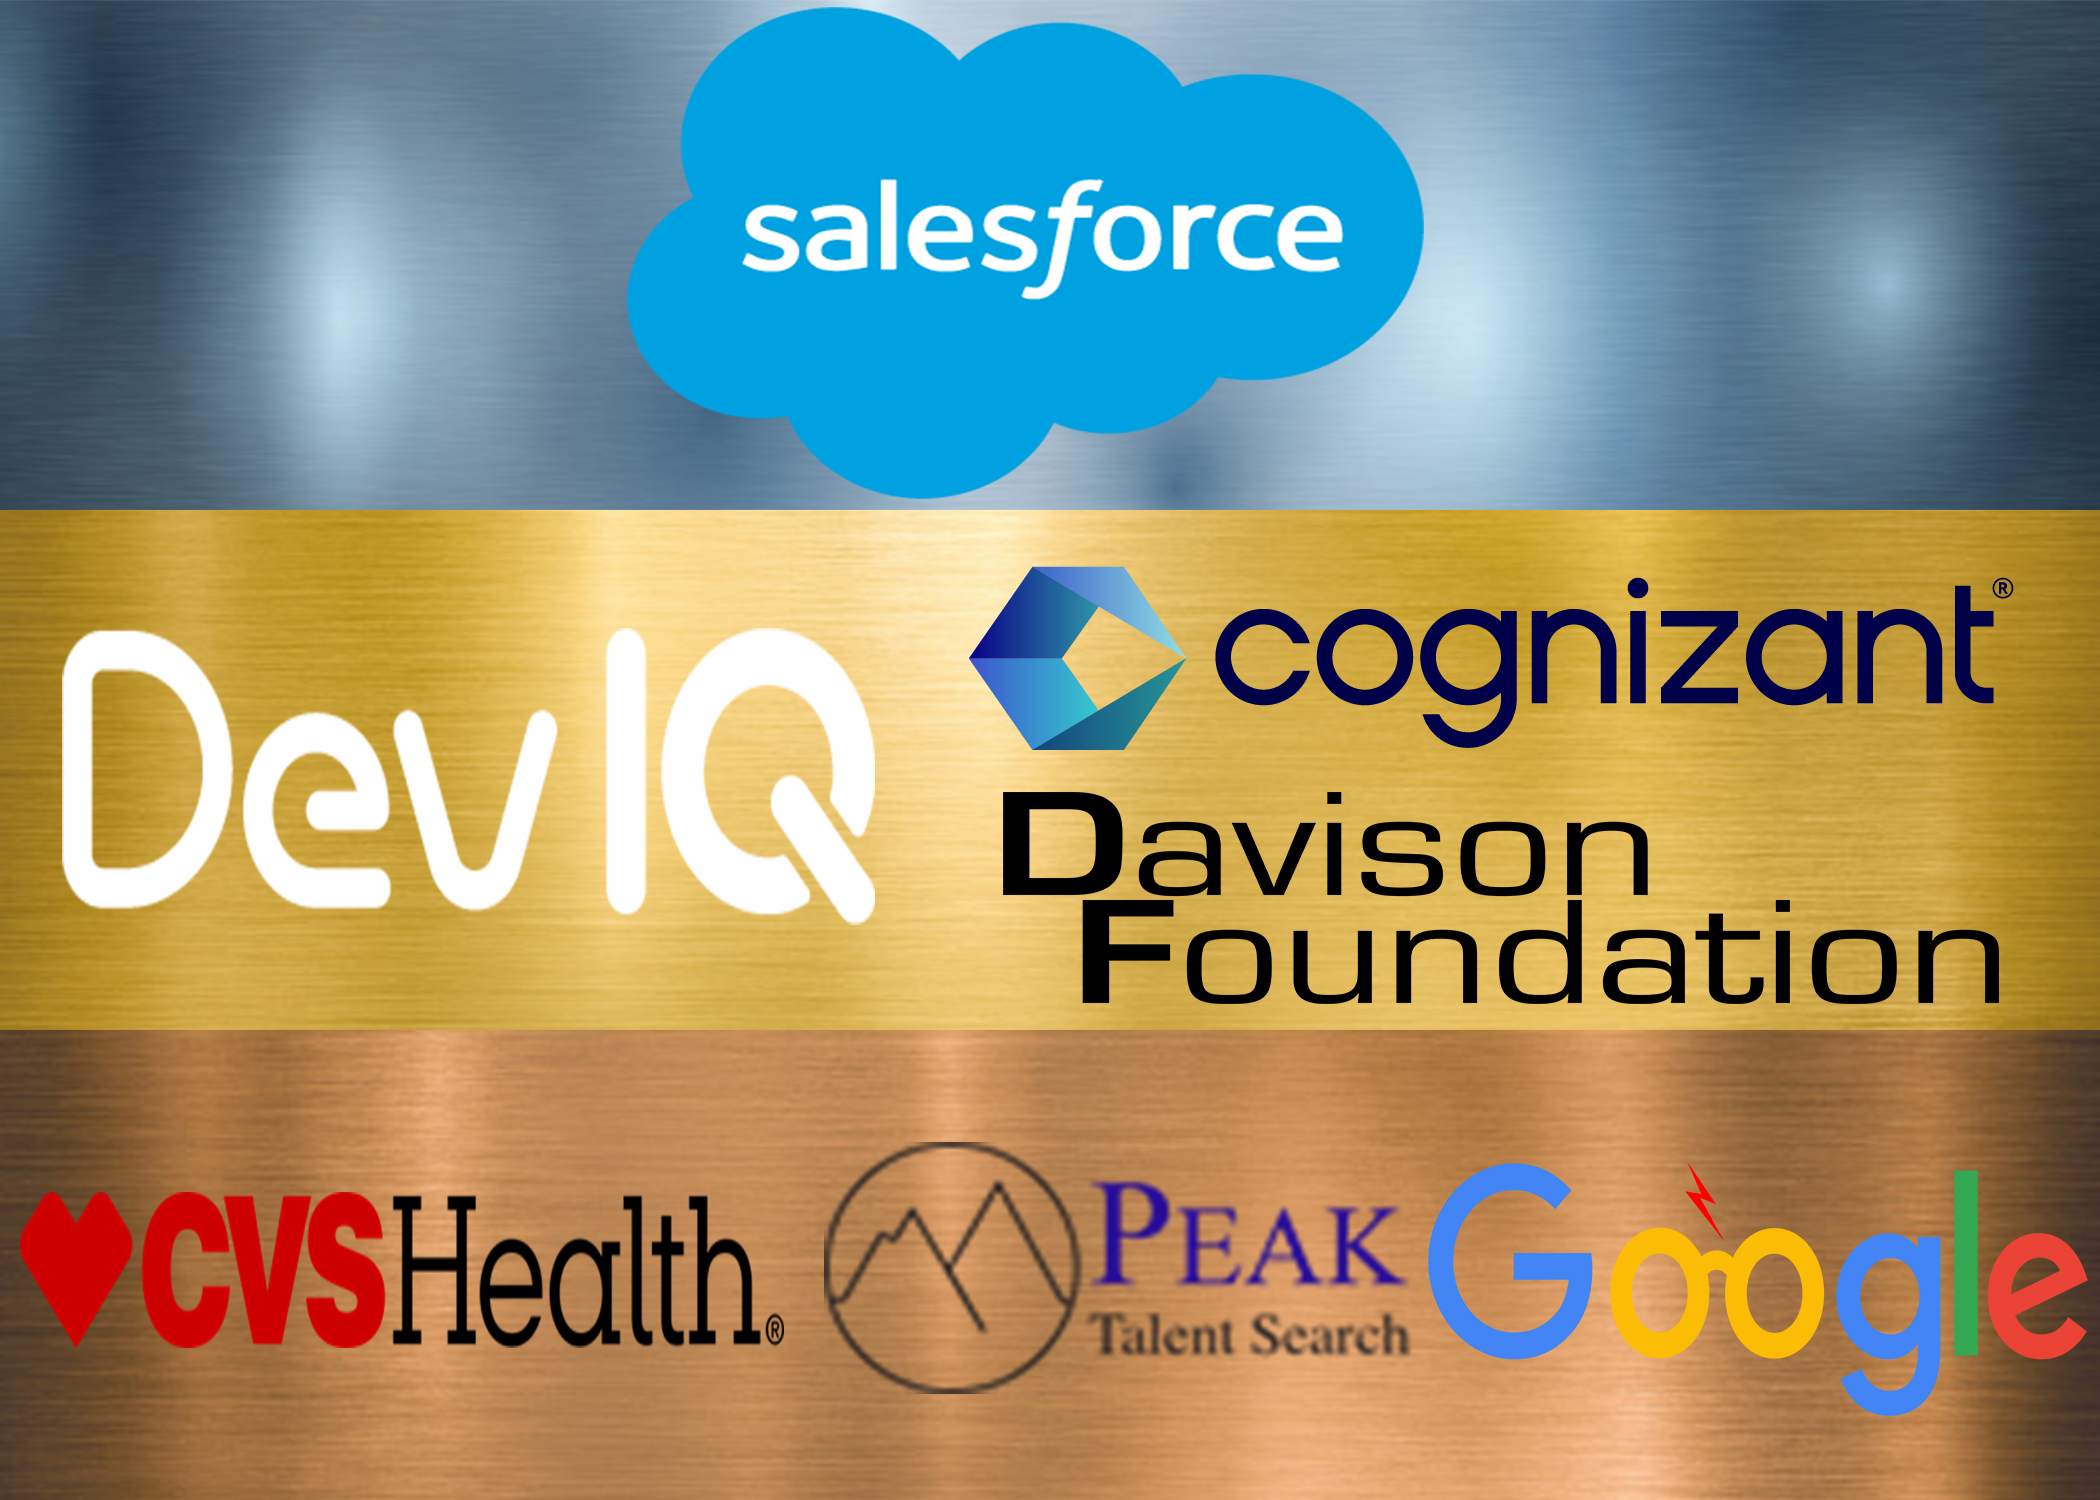 > A Blue Cloud with the word Salesforce in white in the middle with a silvery blue background. > The Logo DevIQ in white lettering and Davison Foundation with black letters with gold background. Cognizant in black lettering and a blue box with gold background. > Go ahead and leave the bronze, here is the description: > CVS Health in red and black letters, Peak Talent Search in black letters, Google in blue and yellow lettering all with a bronze background.